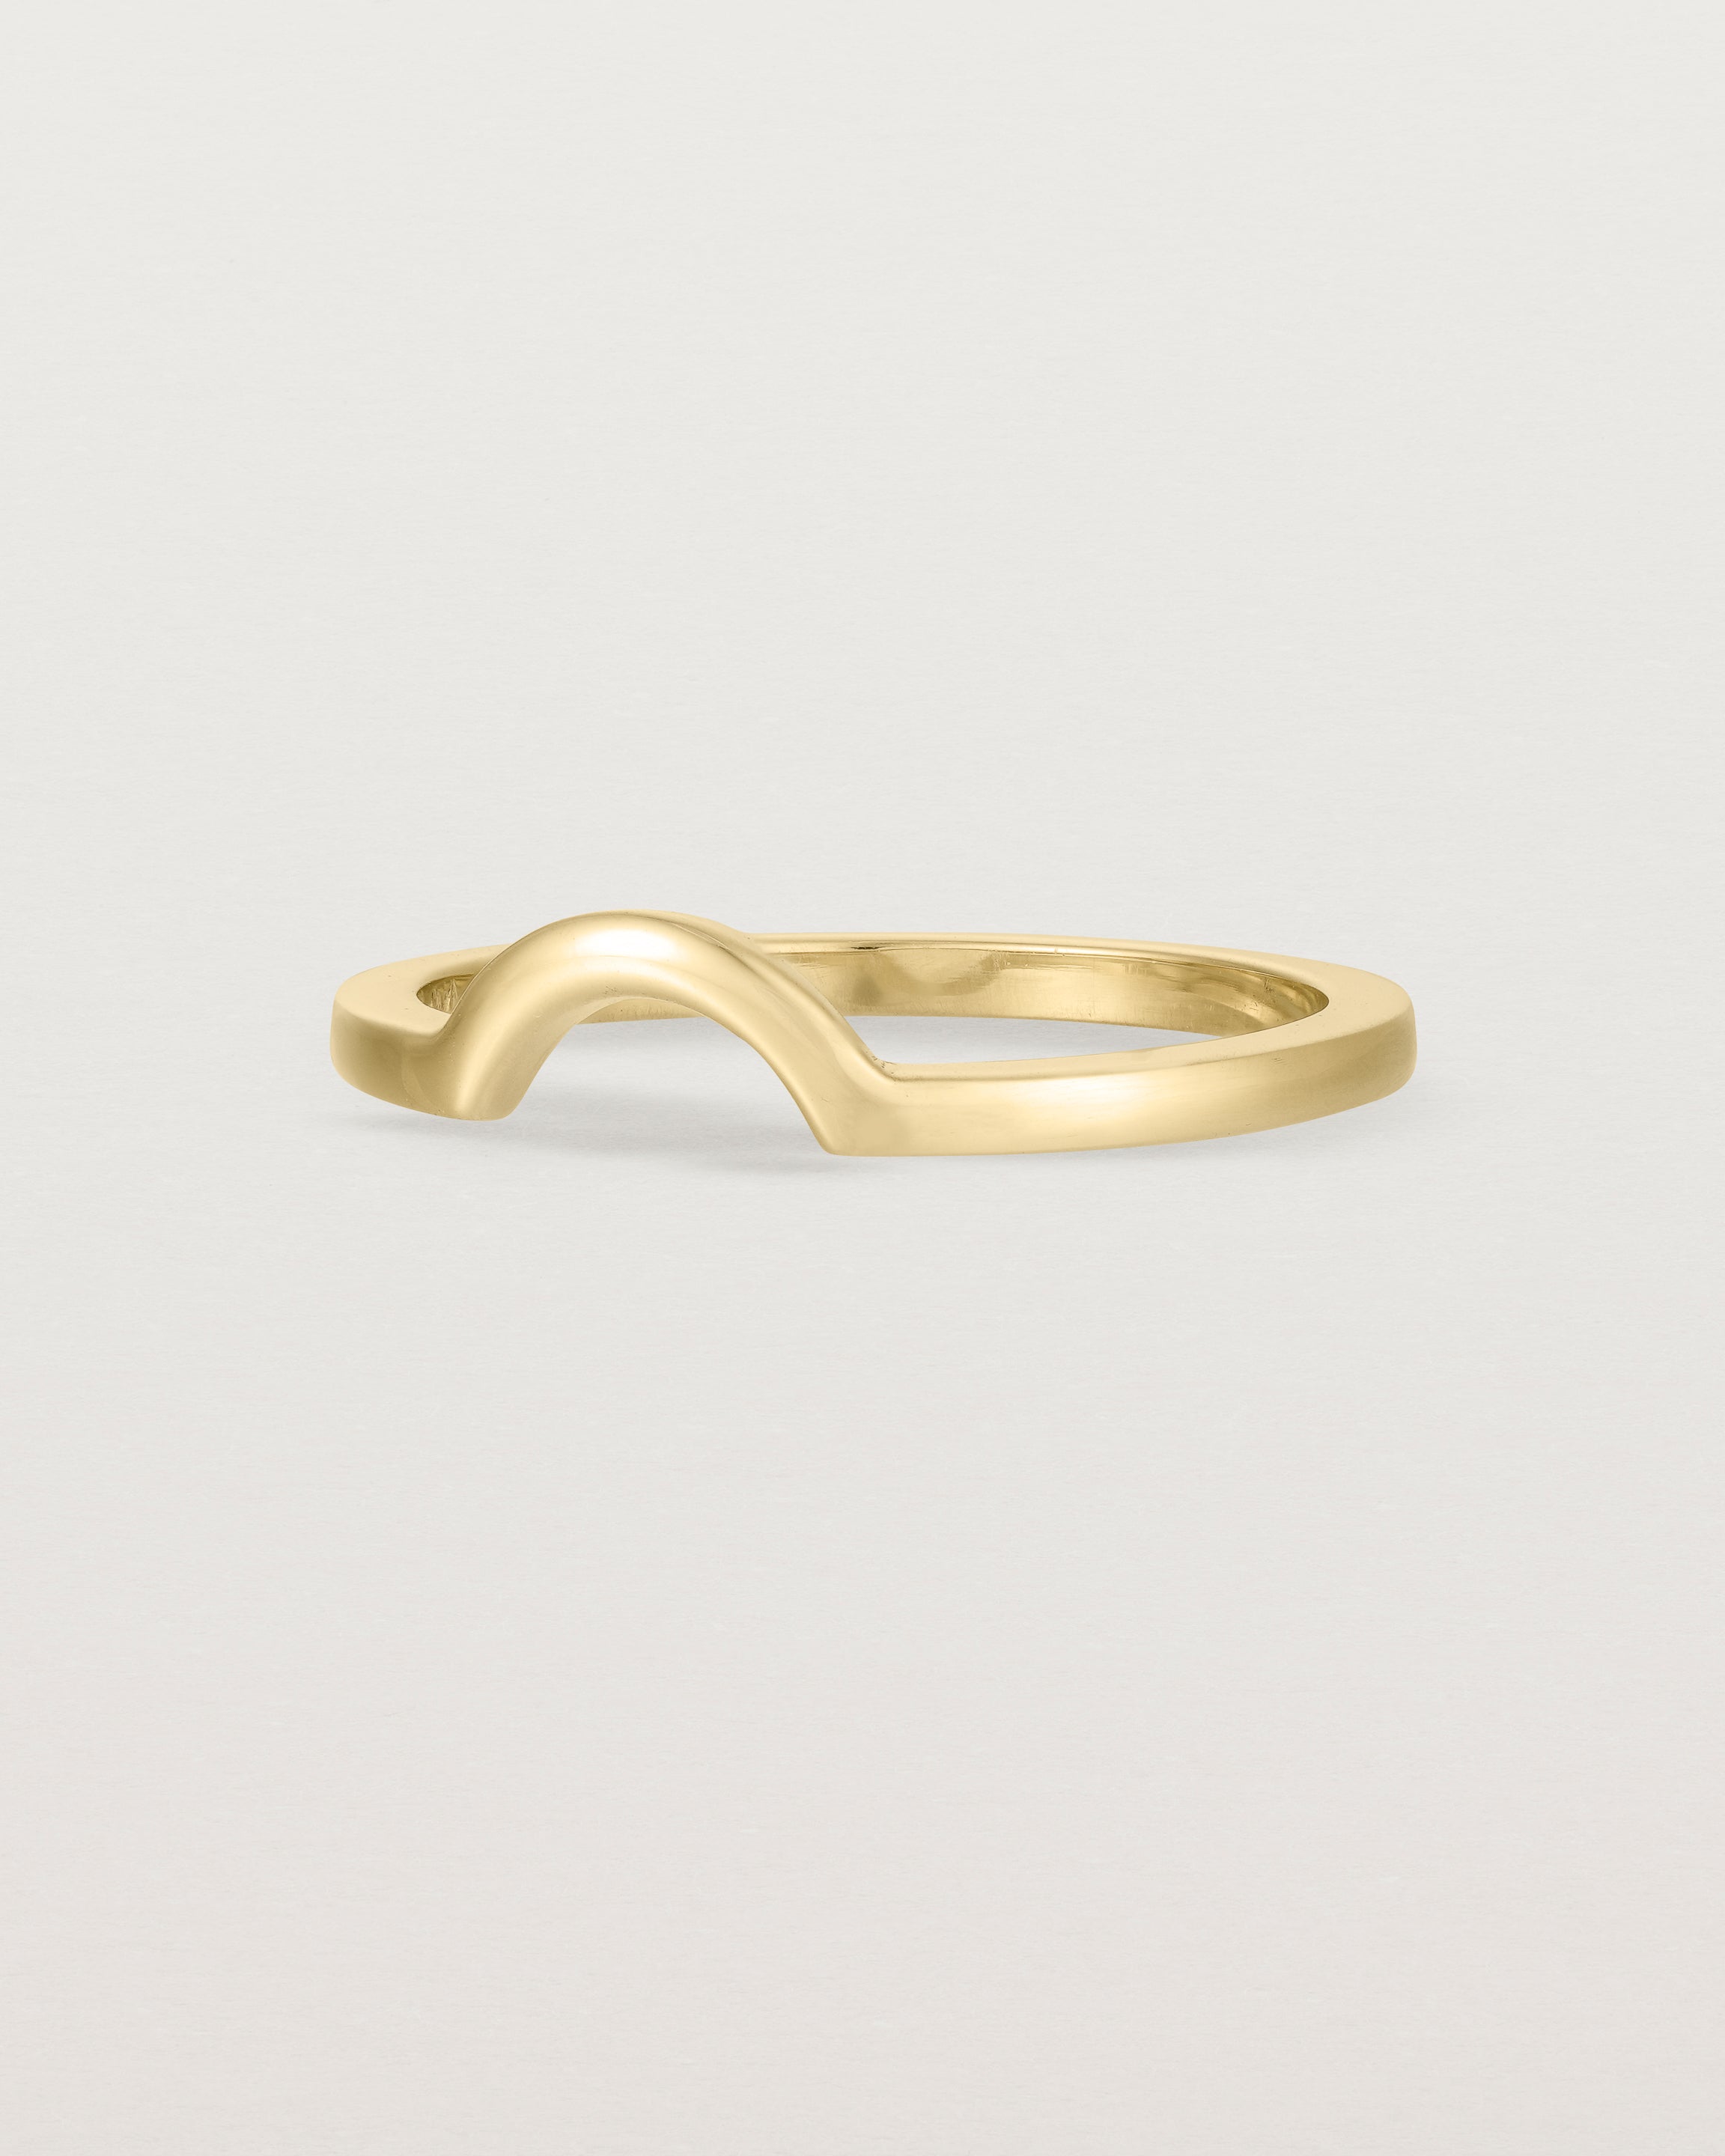 A classic small arc crown ring crafted in yellow gold